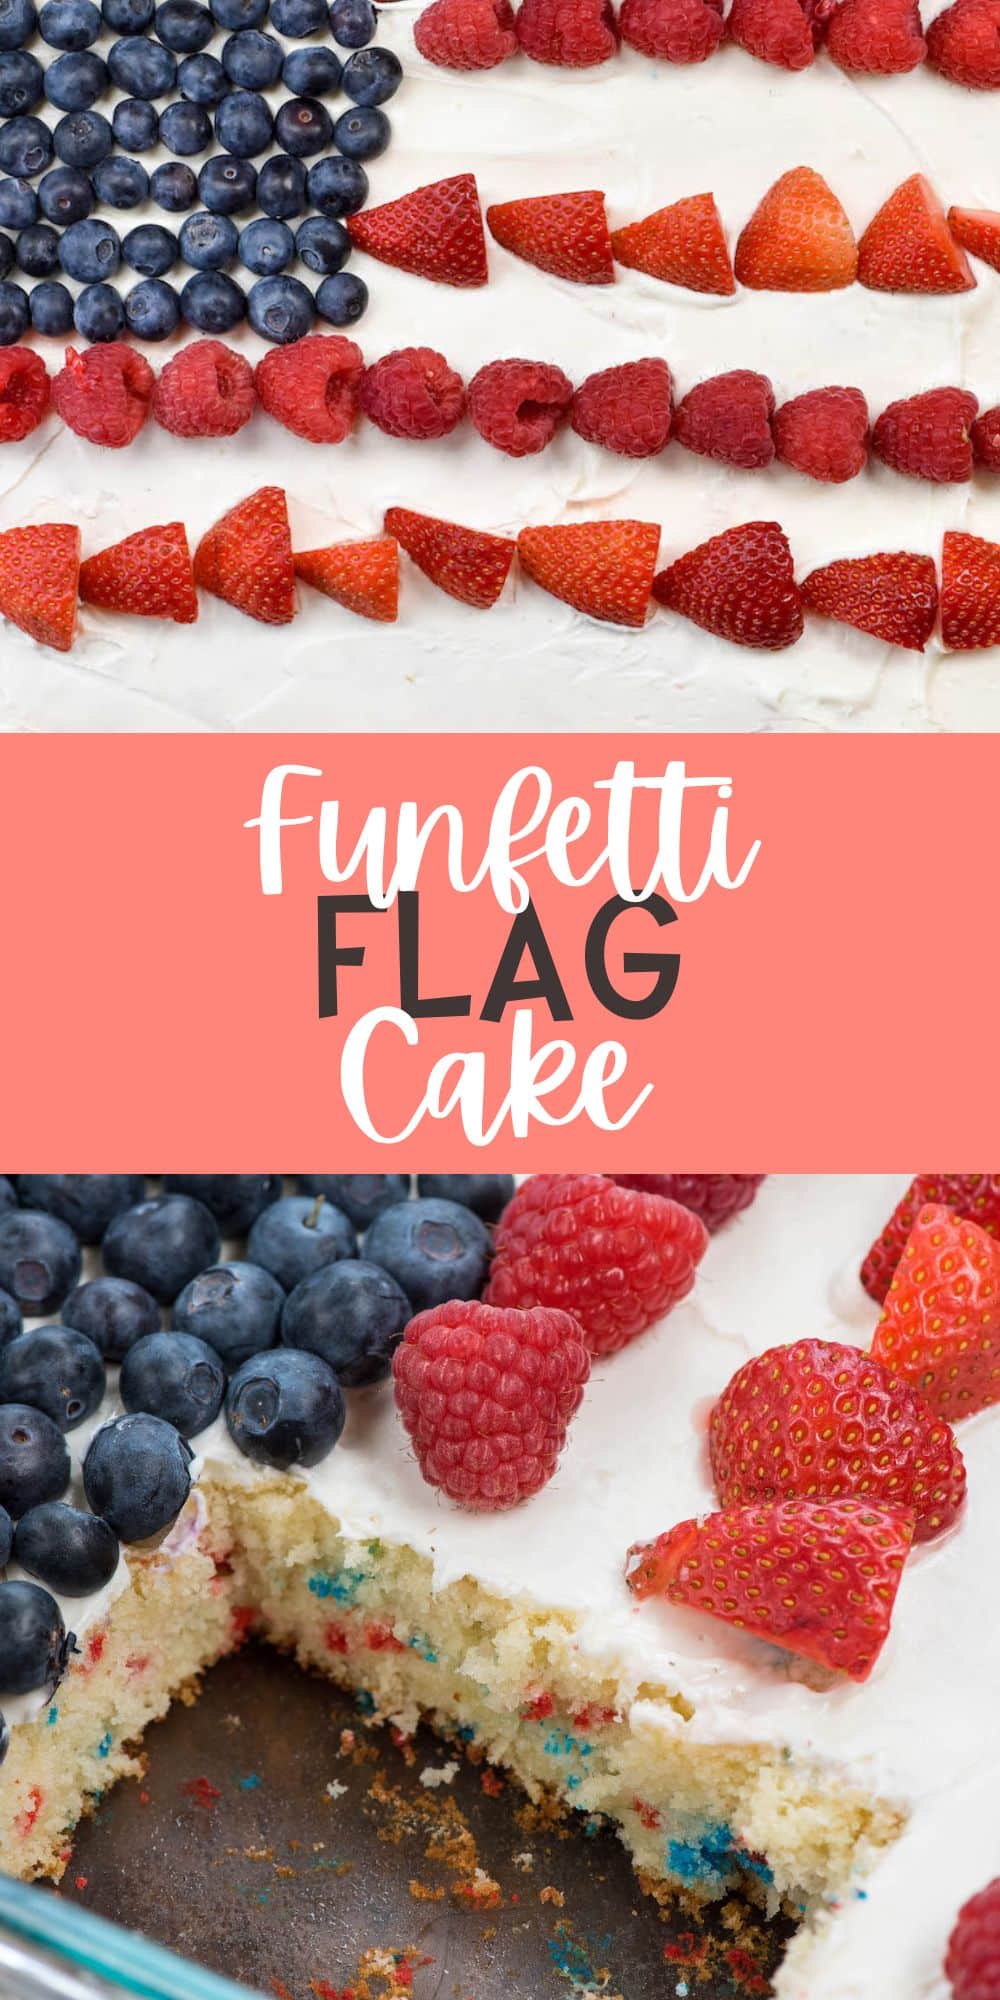 two photos of flag cake with blueberries and strawberries on top forming the American flag with words on the image.